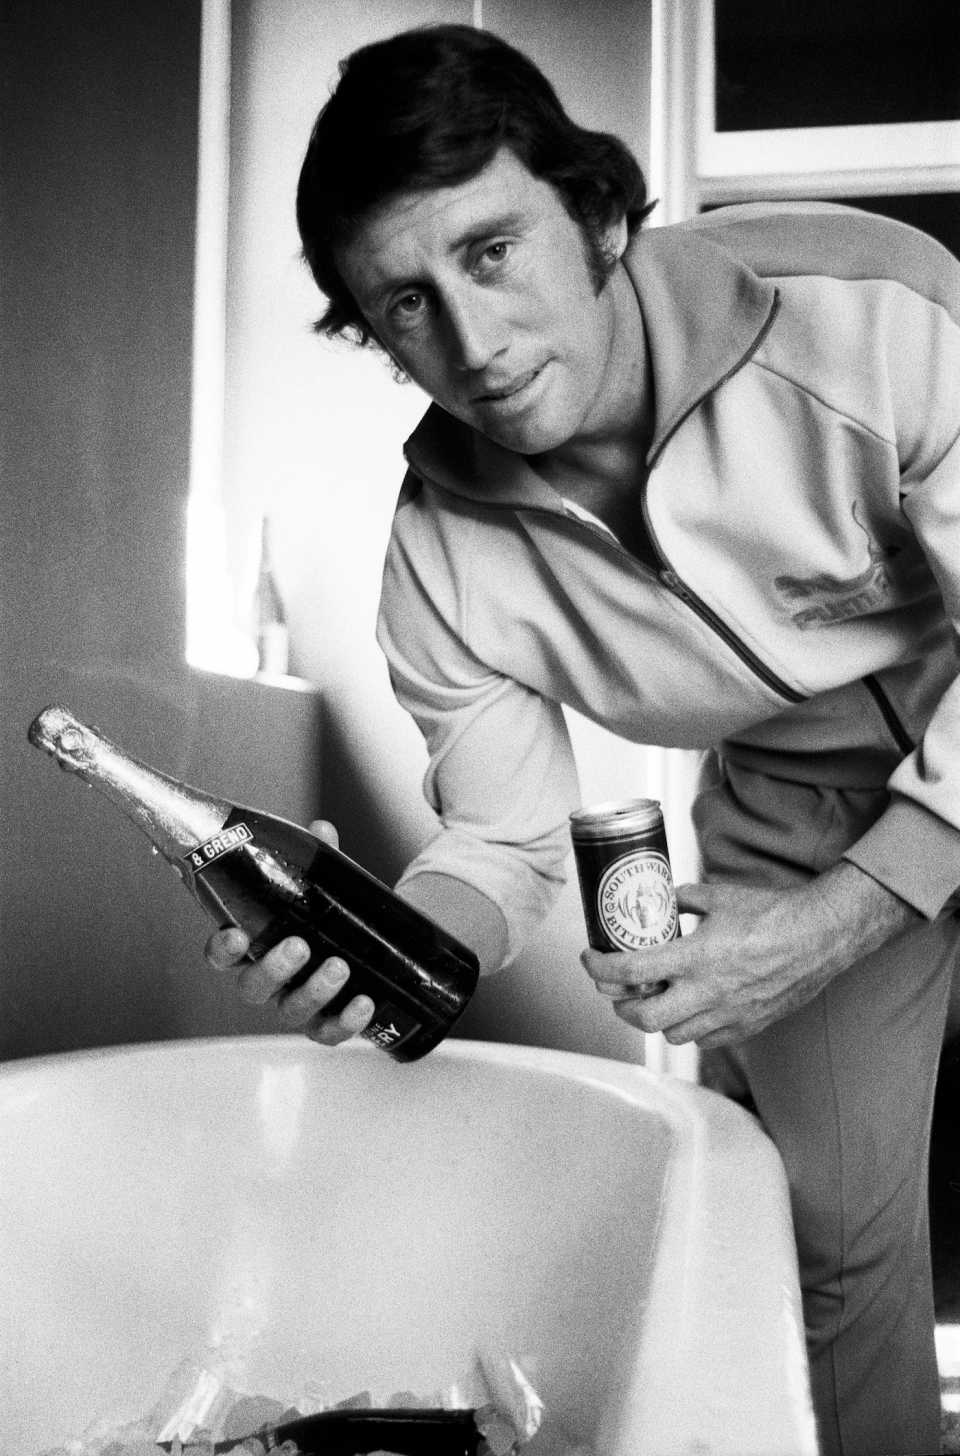 Ian Chappell stores the victory drinks in the ice bath, England vs Australia, 5th day, 5th Test, The Ashes, The Oval, August 16, 1972